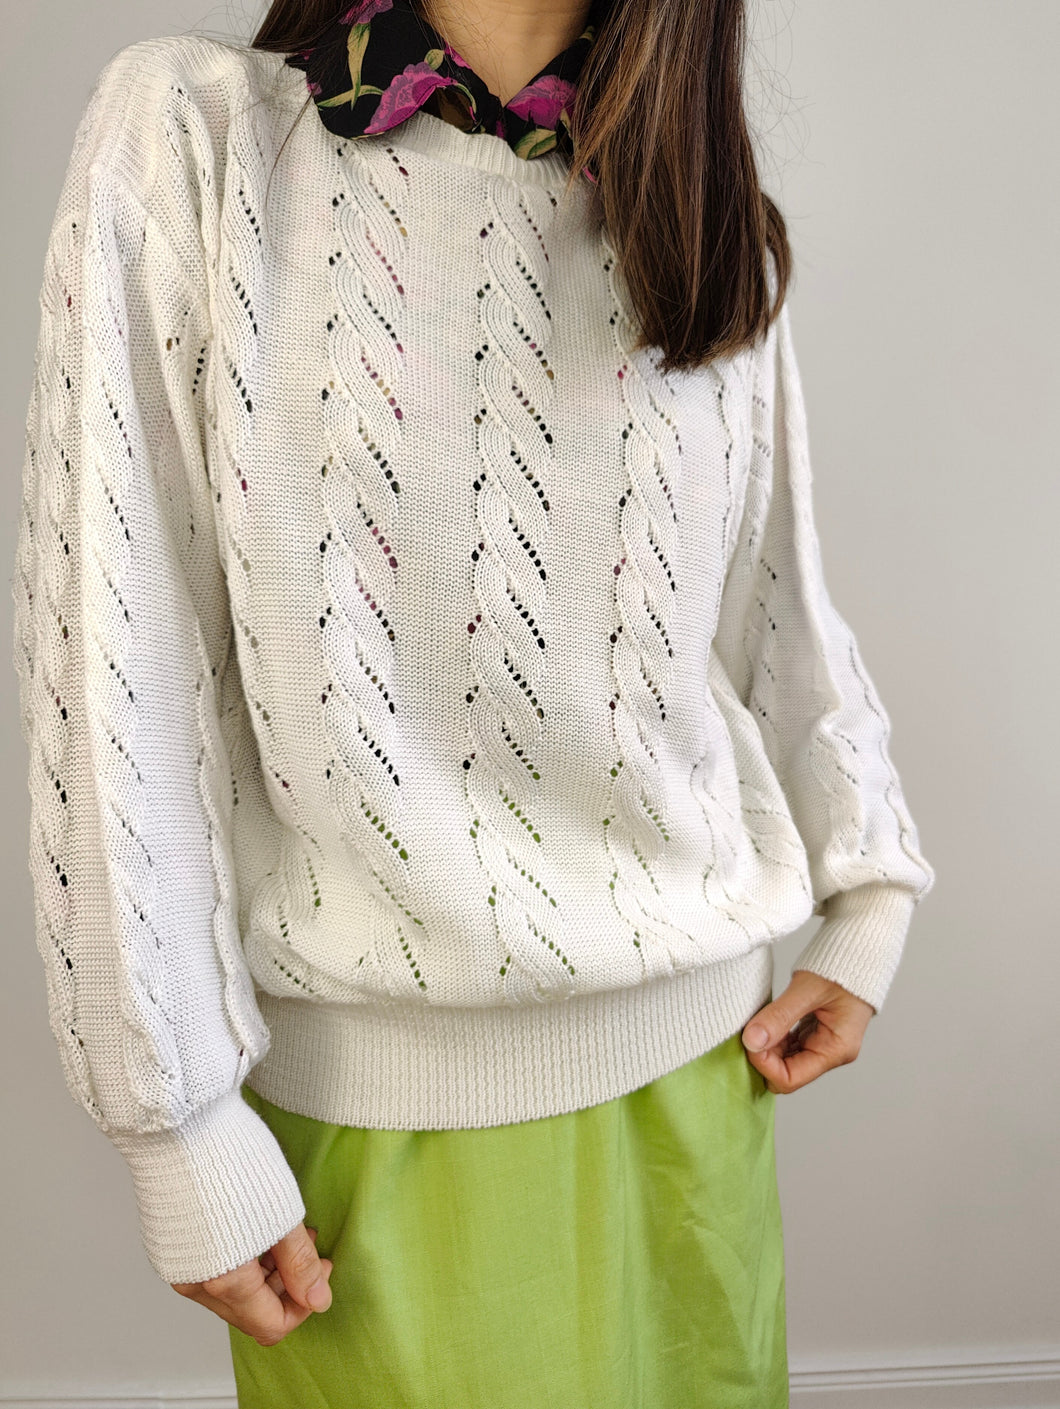 The White Cable Crochet Knit Pullover | Vintage sweater jumper plain boat neckline women summer spring top balloon sleeves M